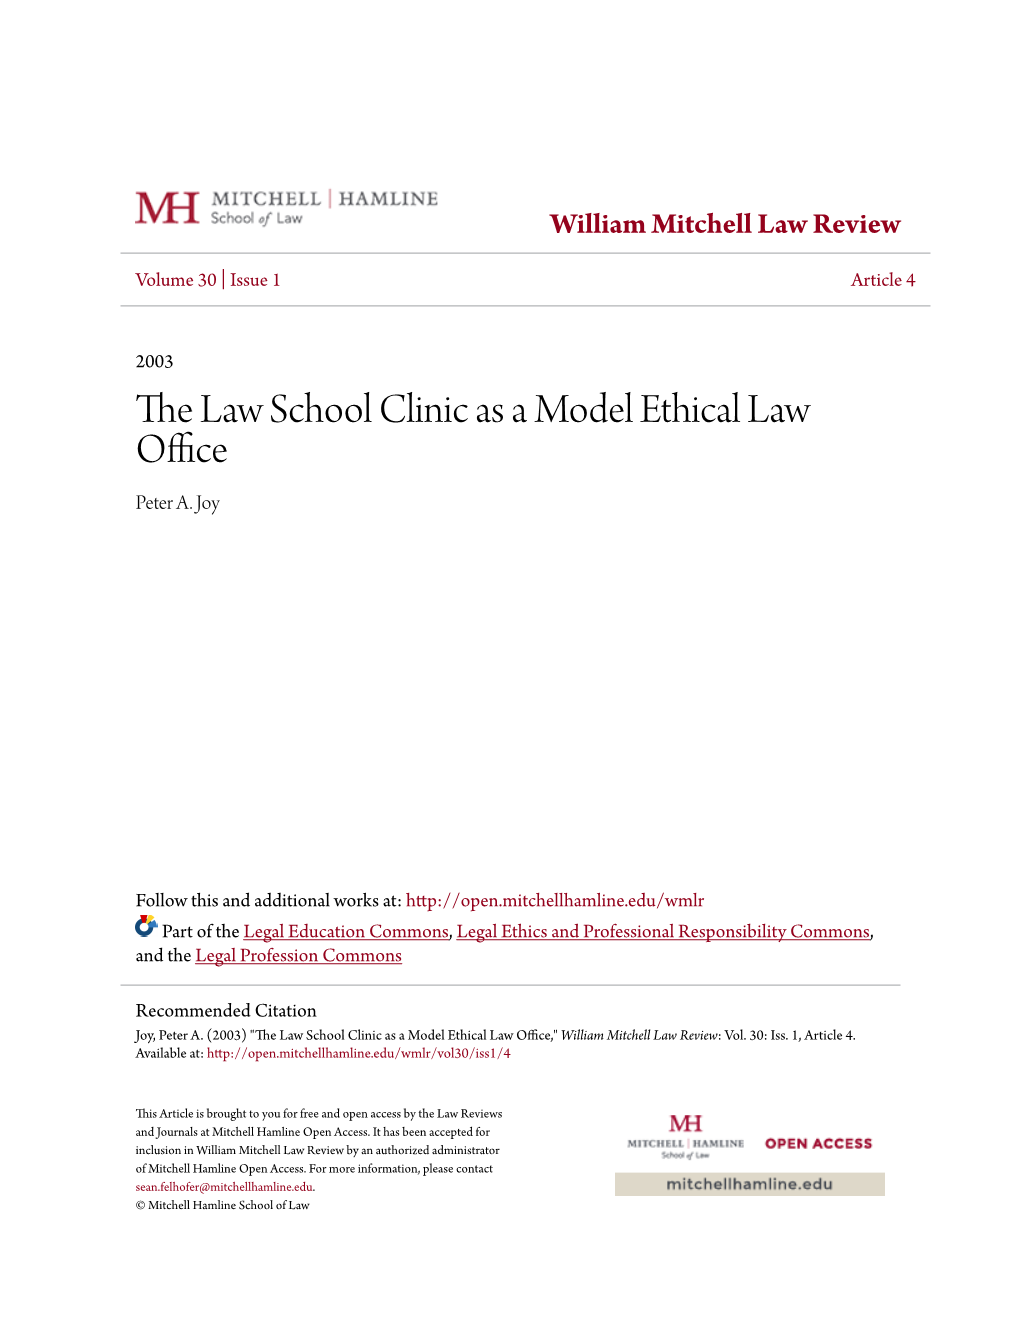 The Law School Clinic As a Model Ethical Law Office Peter A